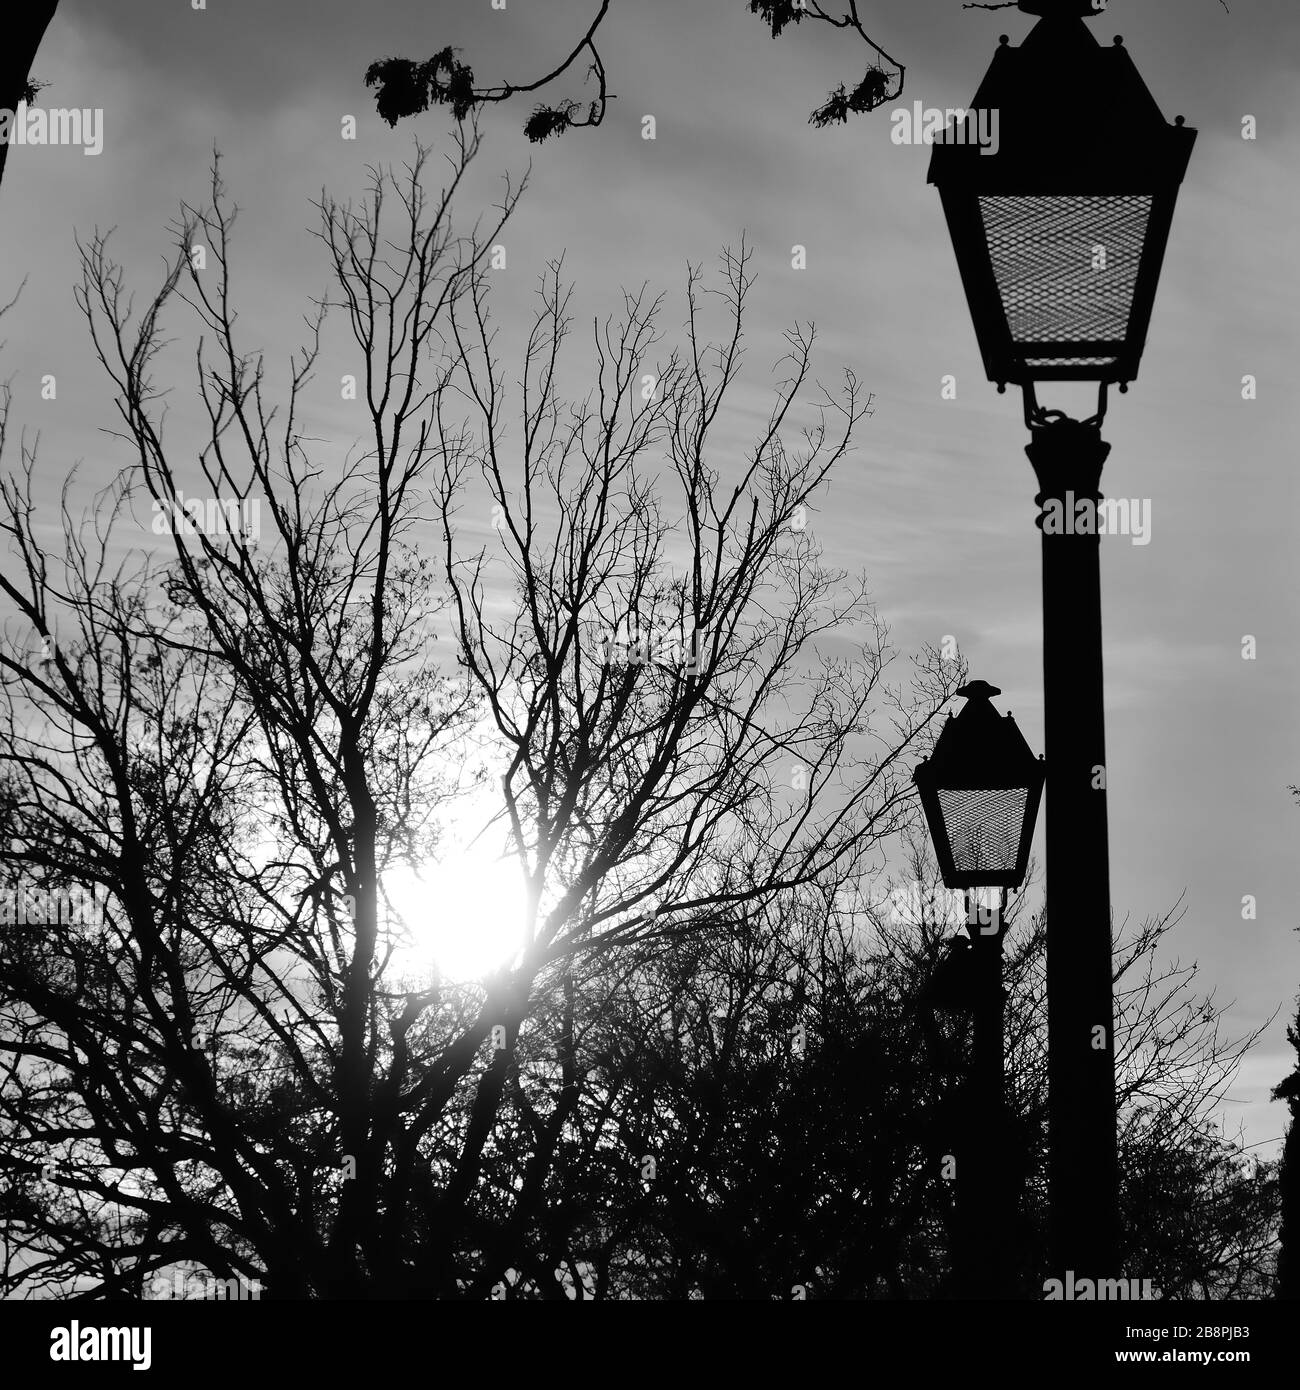 Walk in the park in black and white among trees and lampposts at sunset Stock Photo